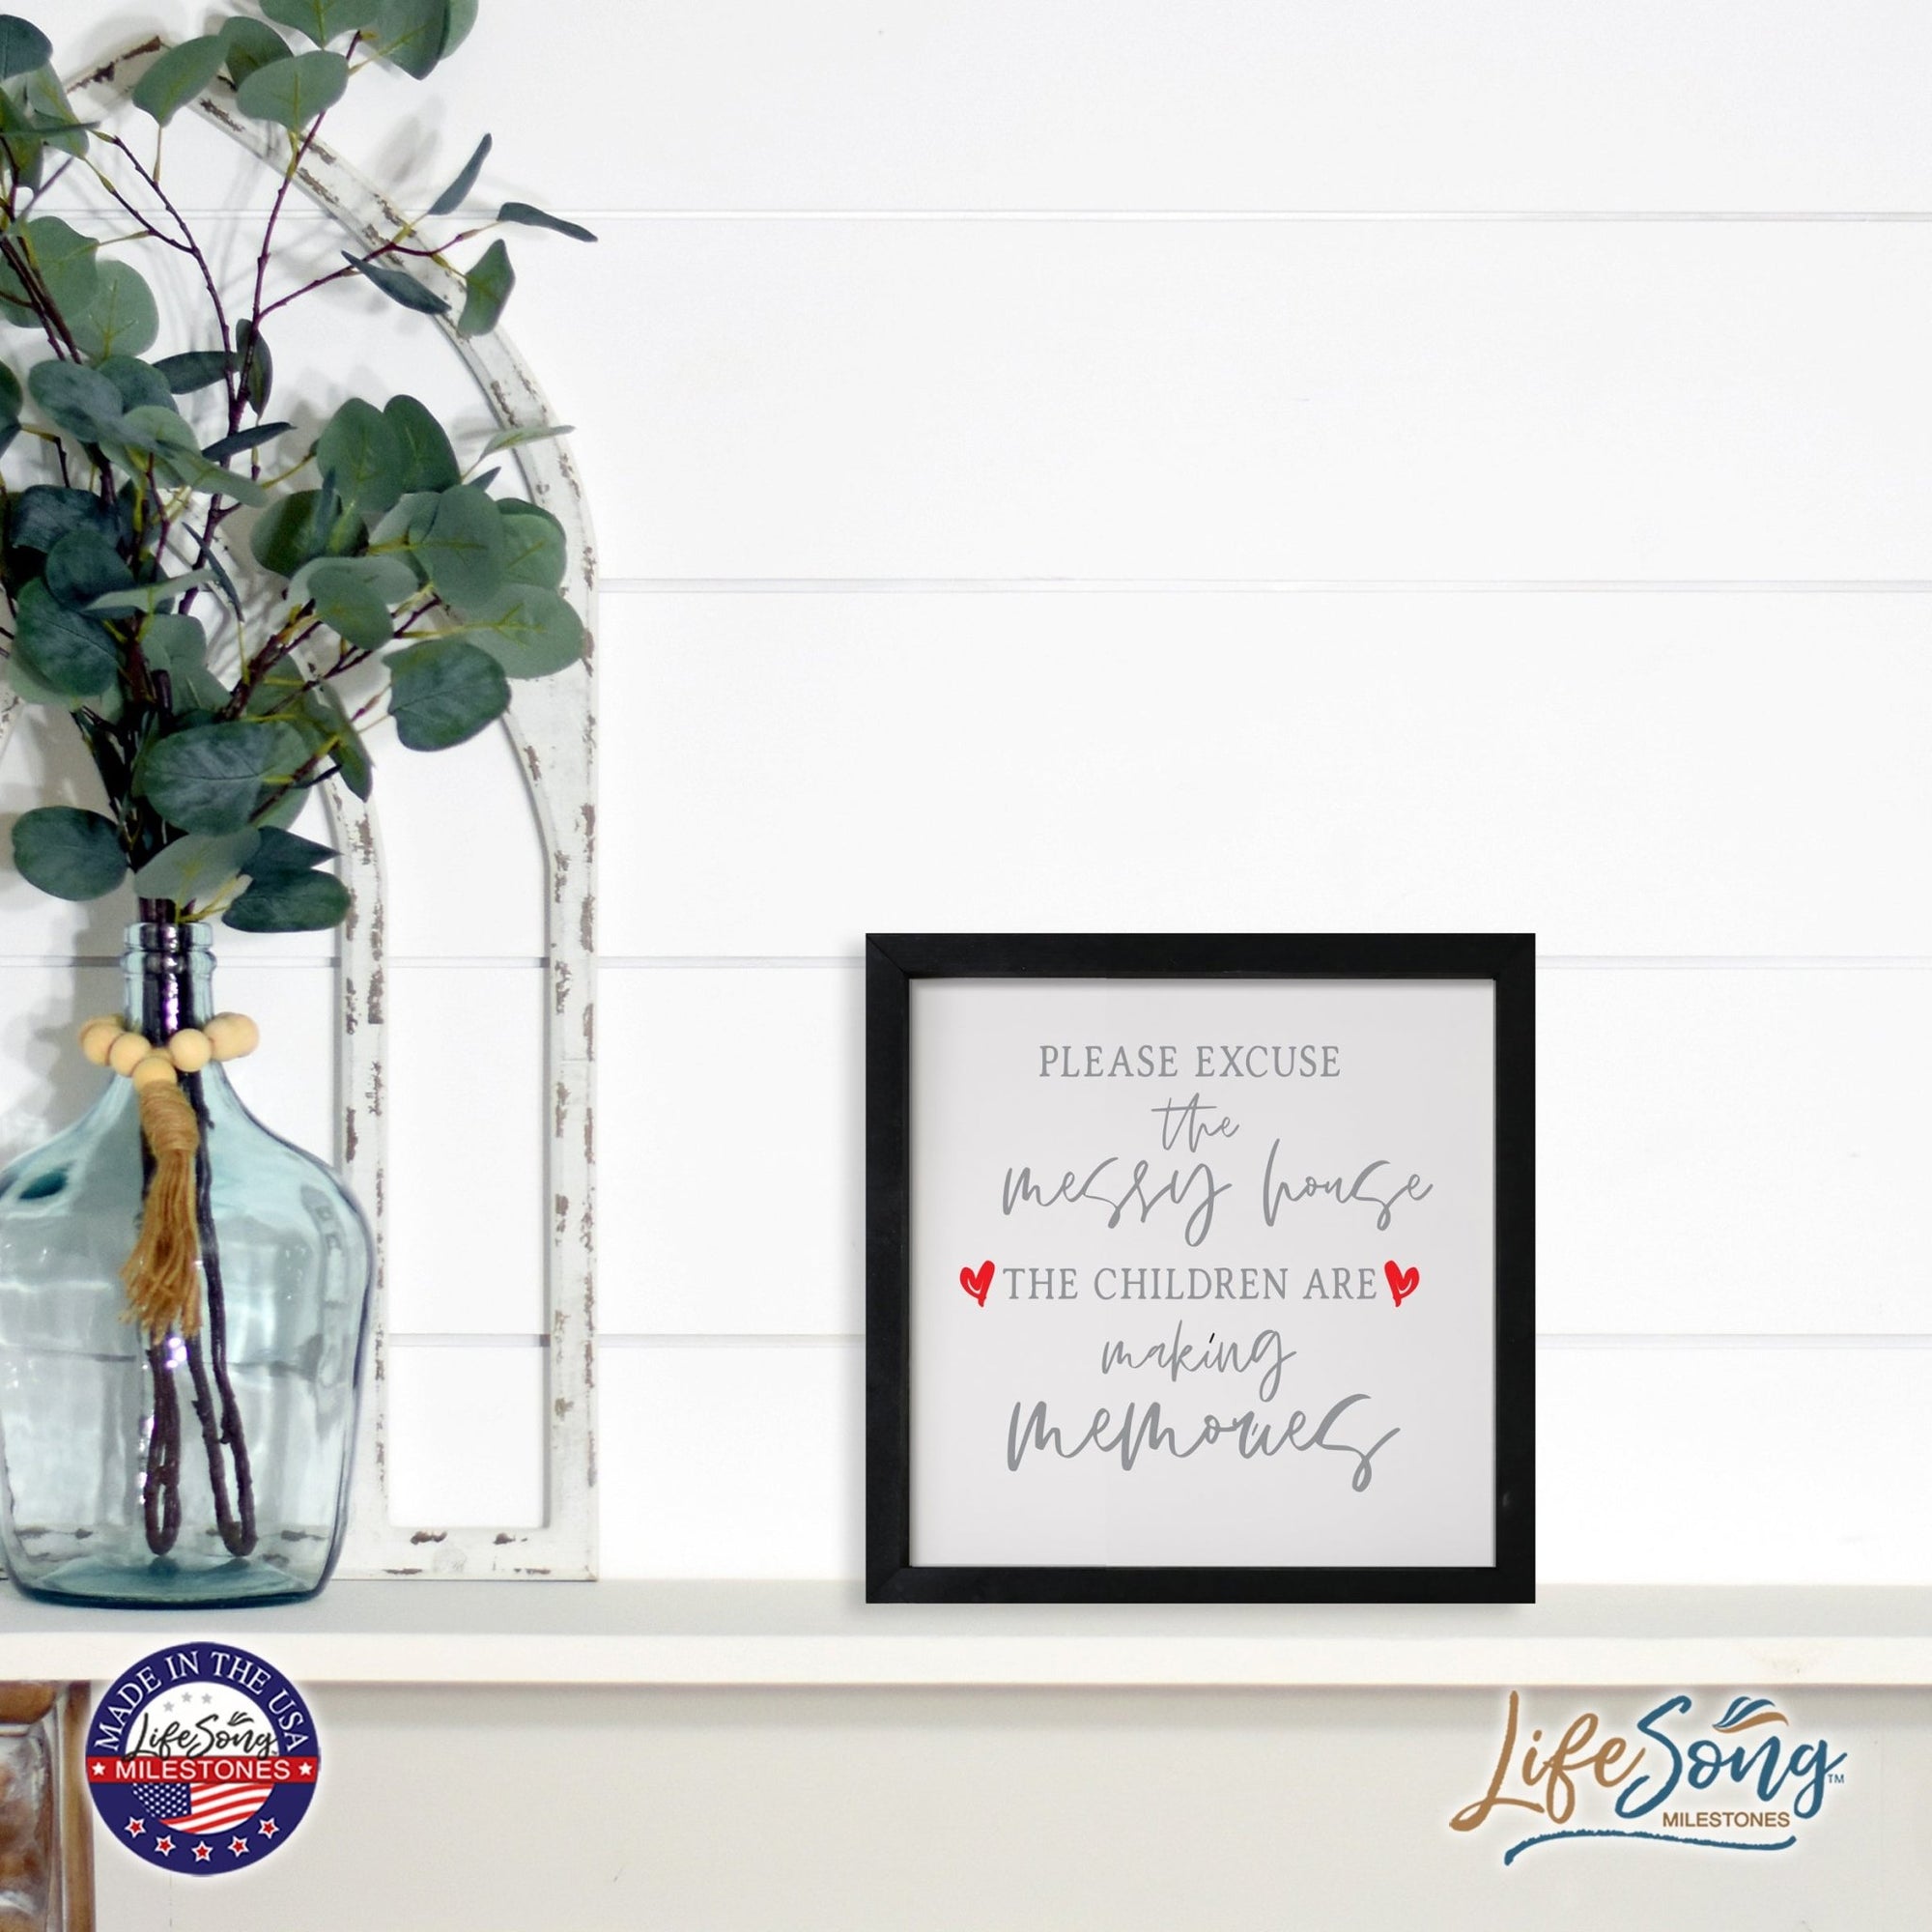 Inspiring Modern Framed Shadow Box 7x7in - Please Excuse The Messy House - LifeSong Milestones